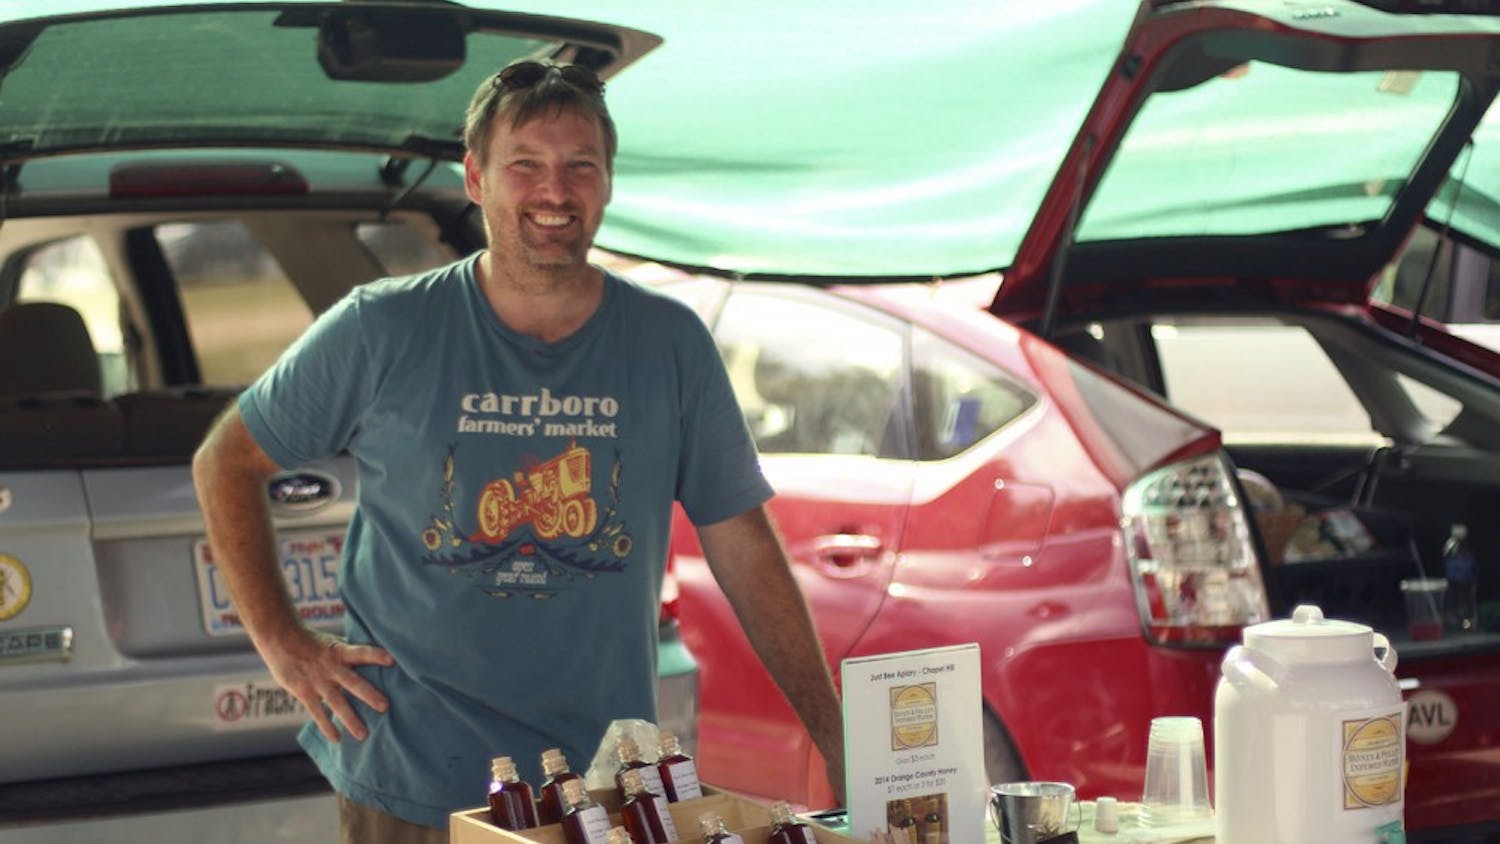 Marty Hanks, owner of Just Bee Apiary, sells his honey producst at the Carrboro Farmer’s Market on Wednesday afternoon.